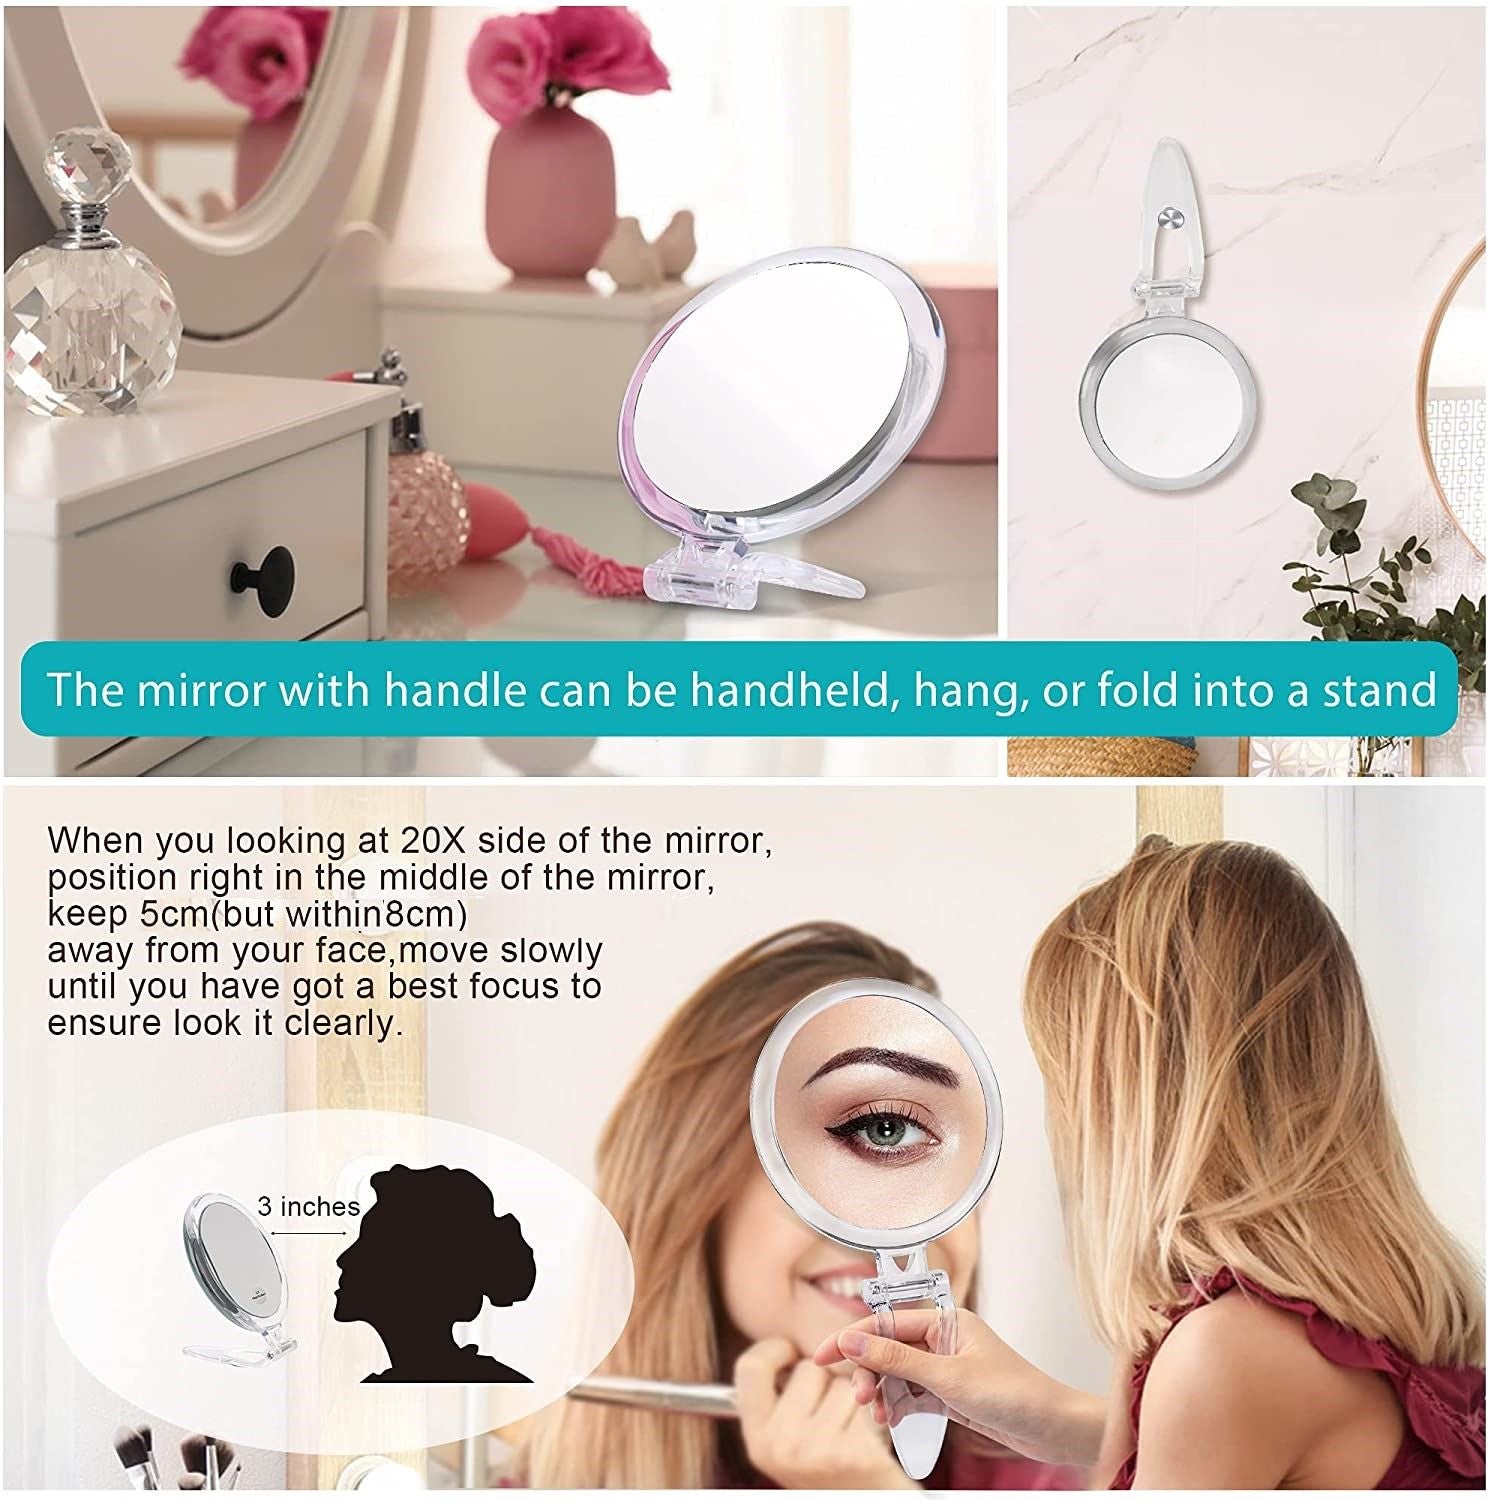 20X Magnifying Hand Mirror Two Sided Use for Makeup Application, Tweezing, and Blackhead/Blemish Removal (15 cm) - image6